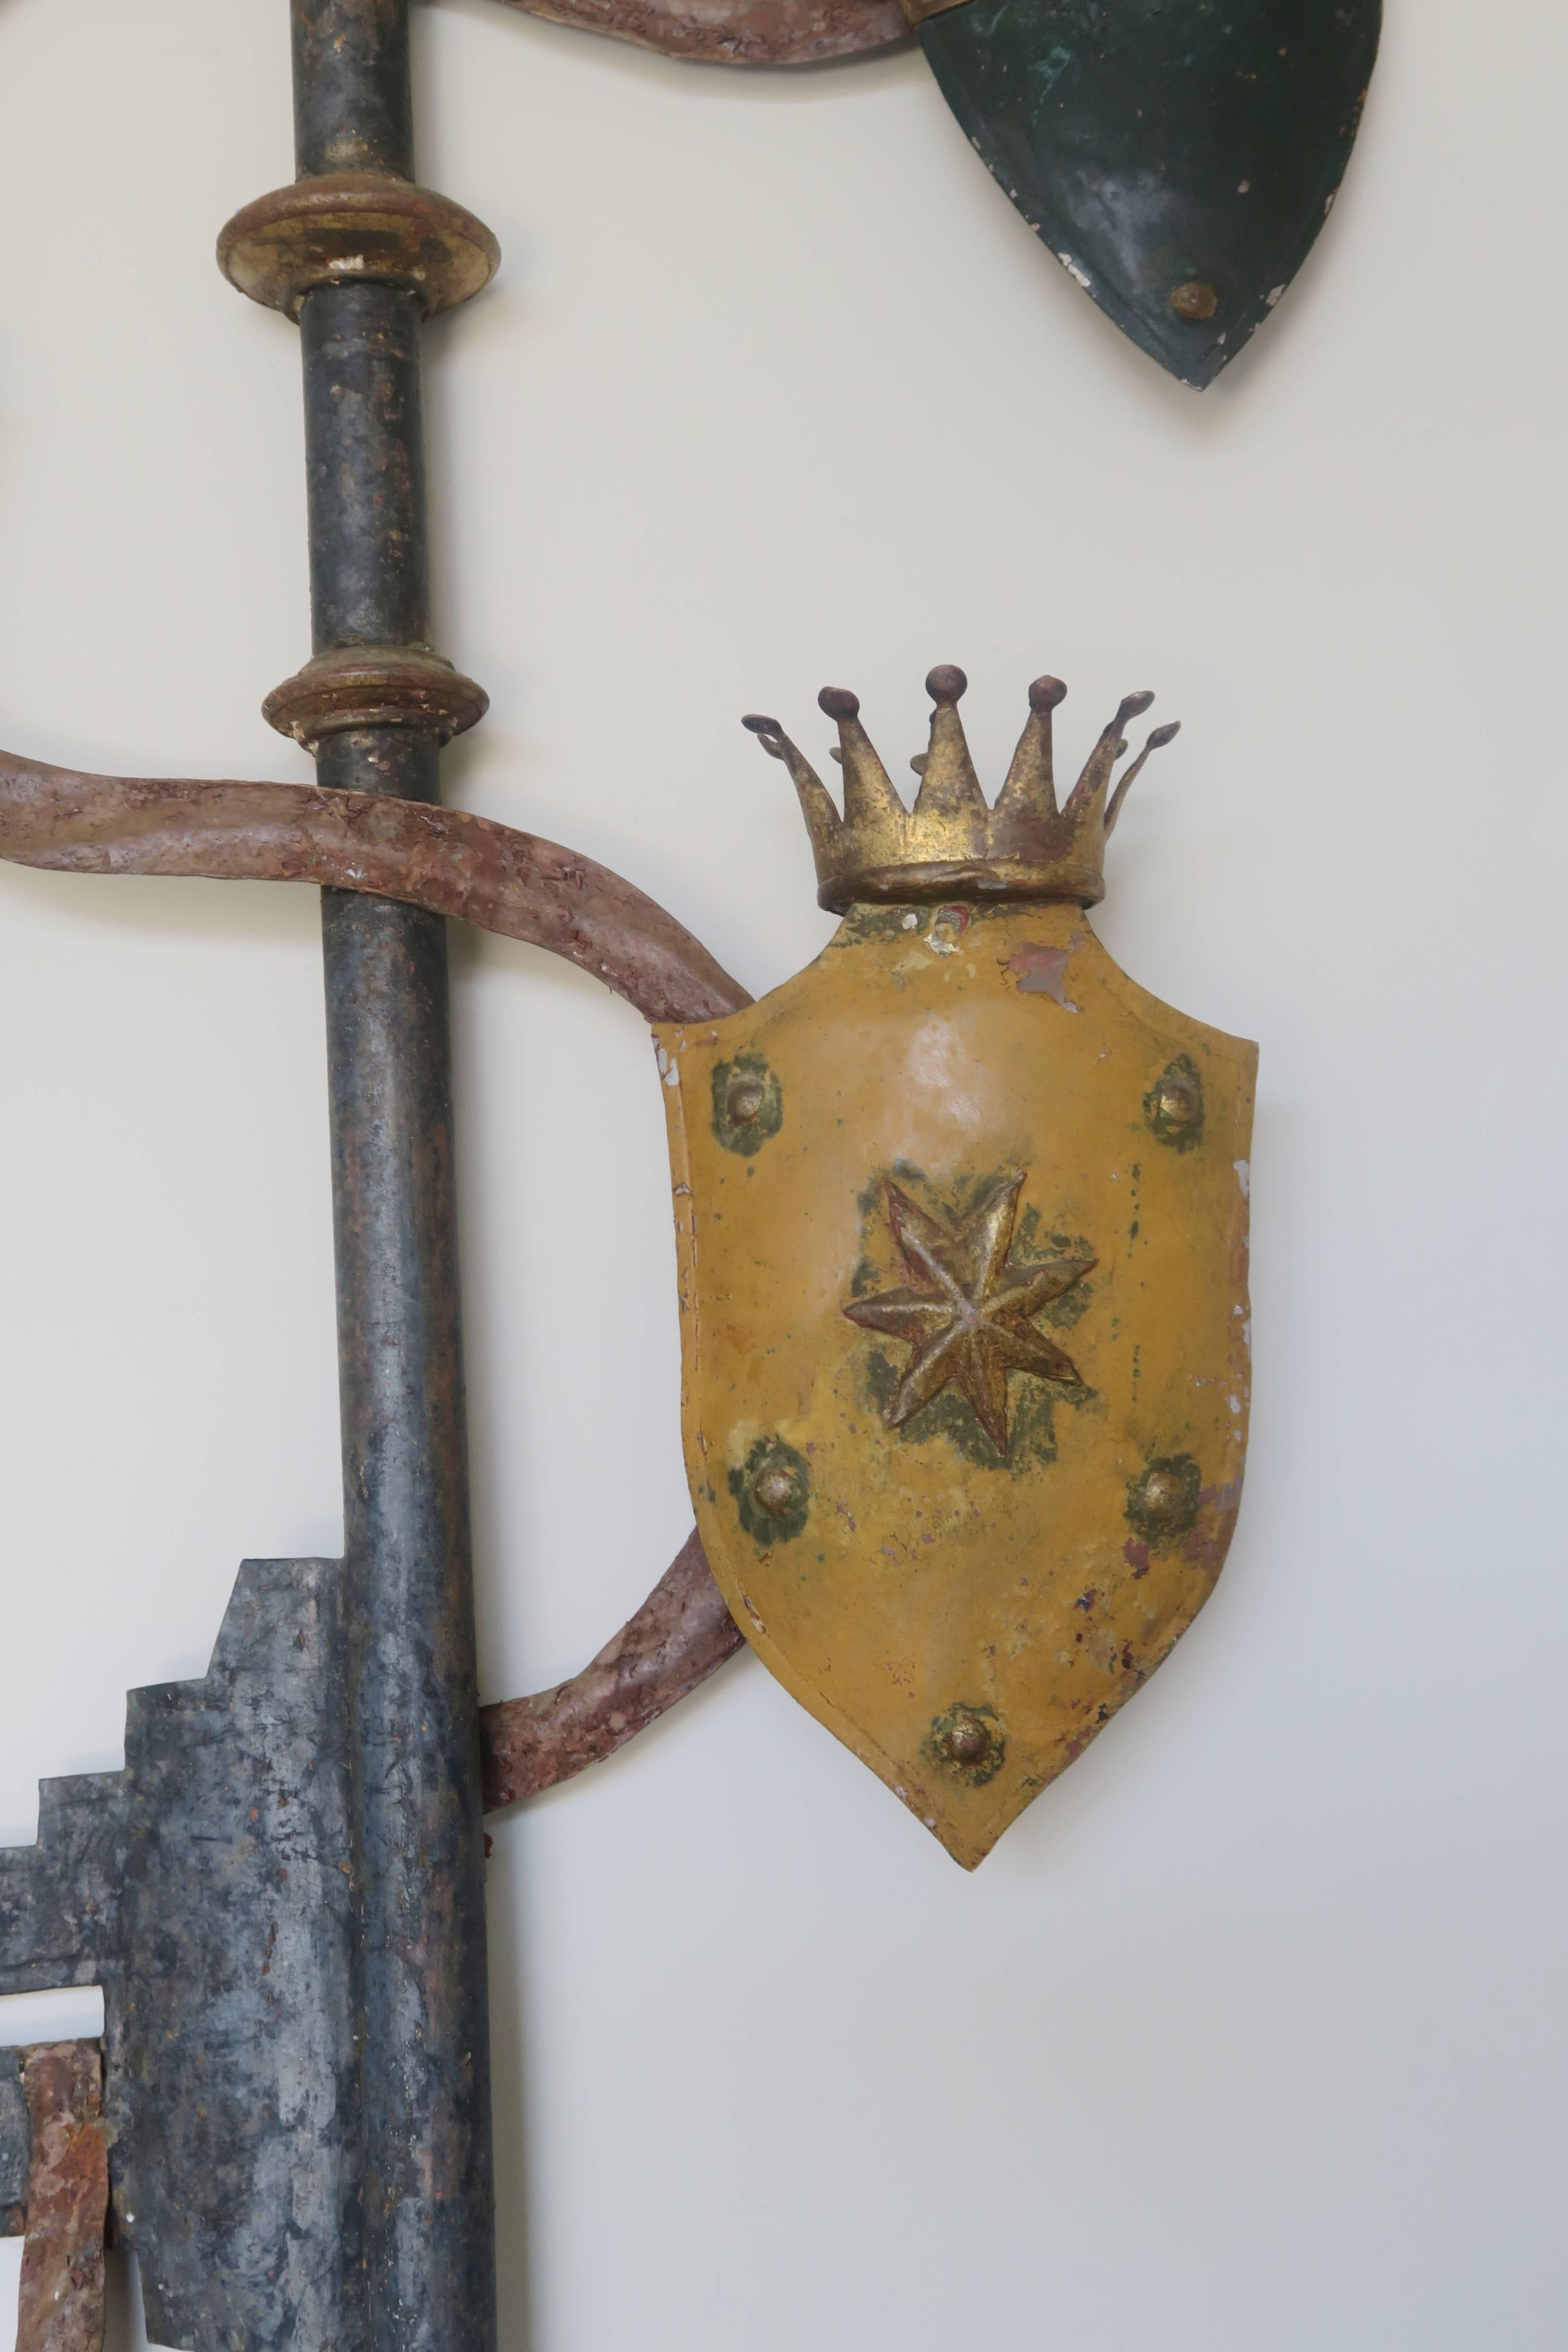 English painted and parcel-gilt tole metal key with crowned shields twisted though out. Great wall decor.